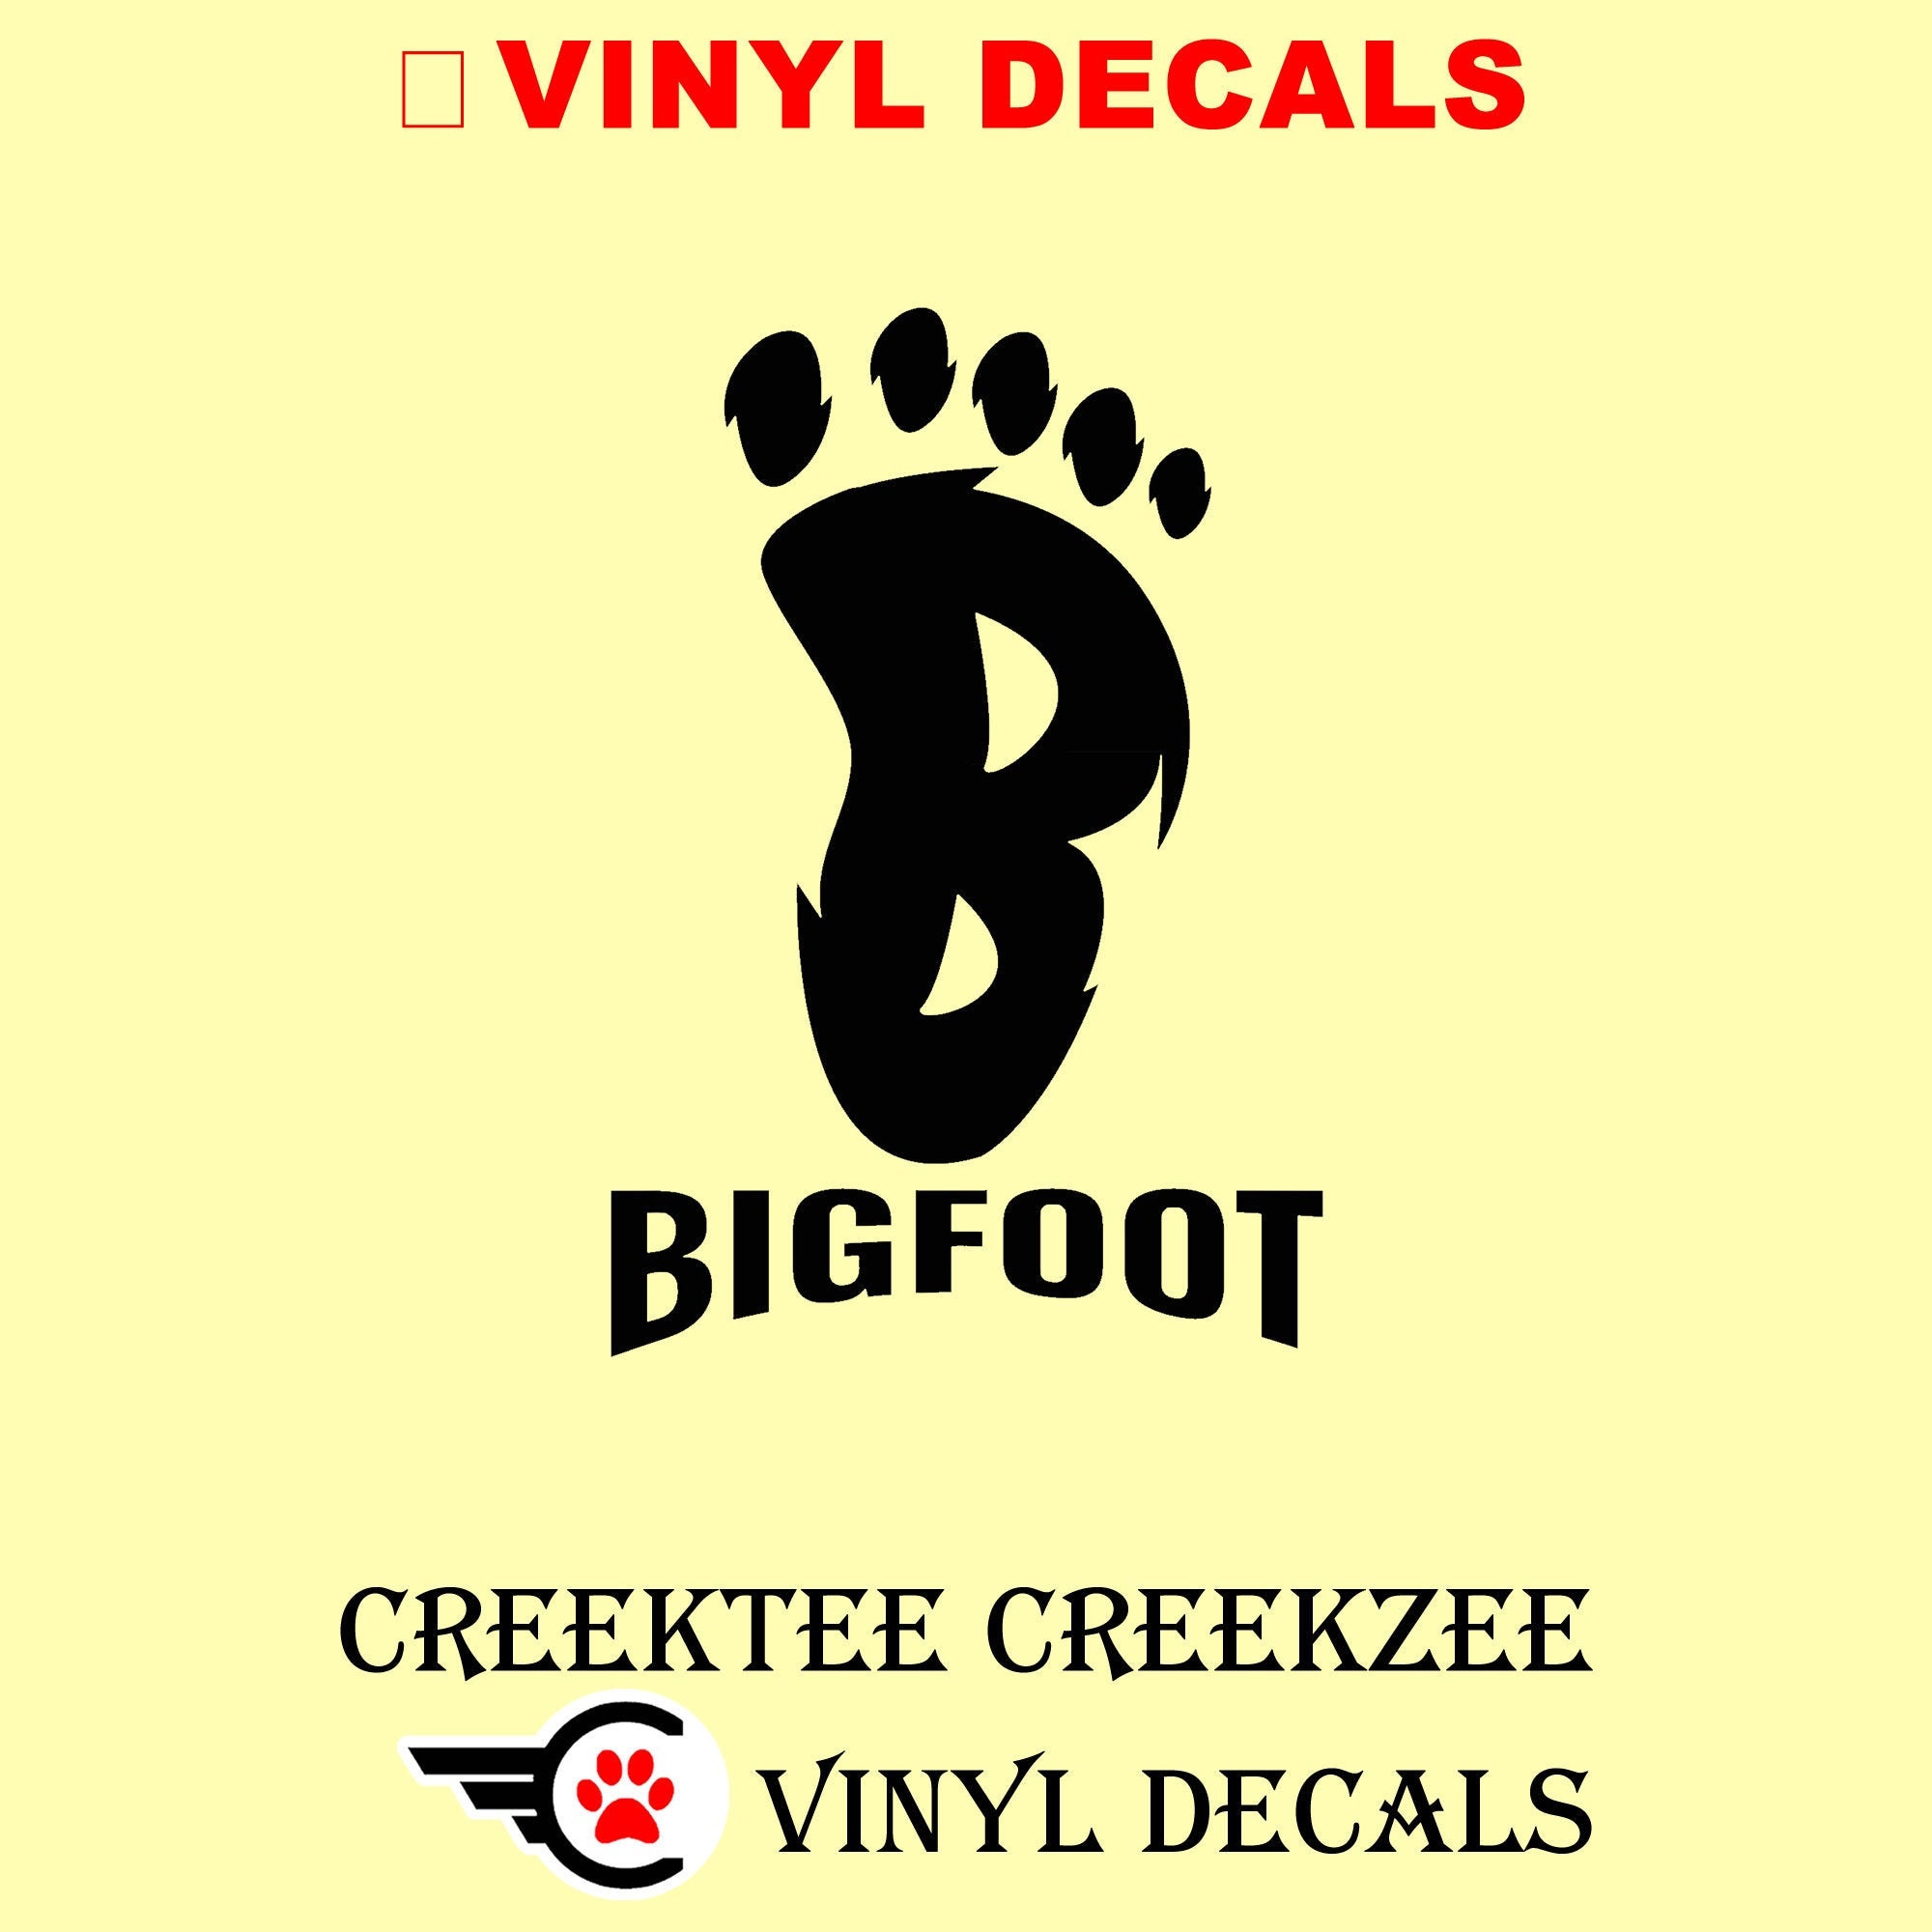 Bigfoot Vinyl Decal Various Sizes and Colors Die Cut Vinyl Decal also in Cool Chrome Colors!